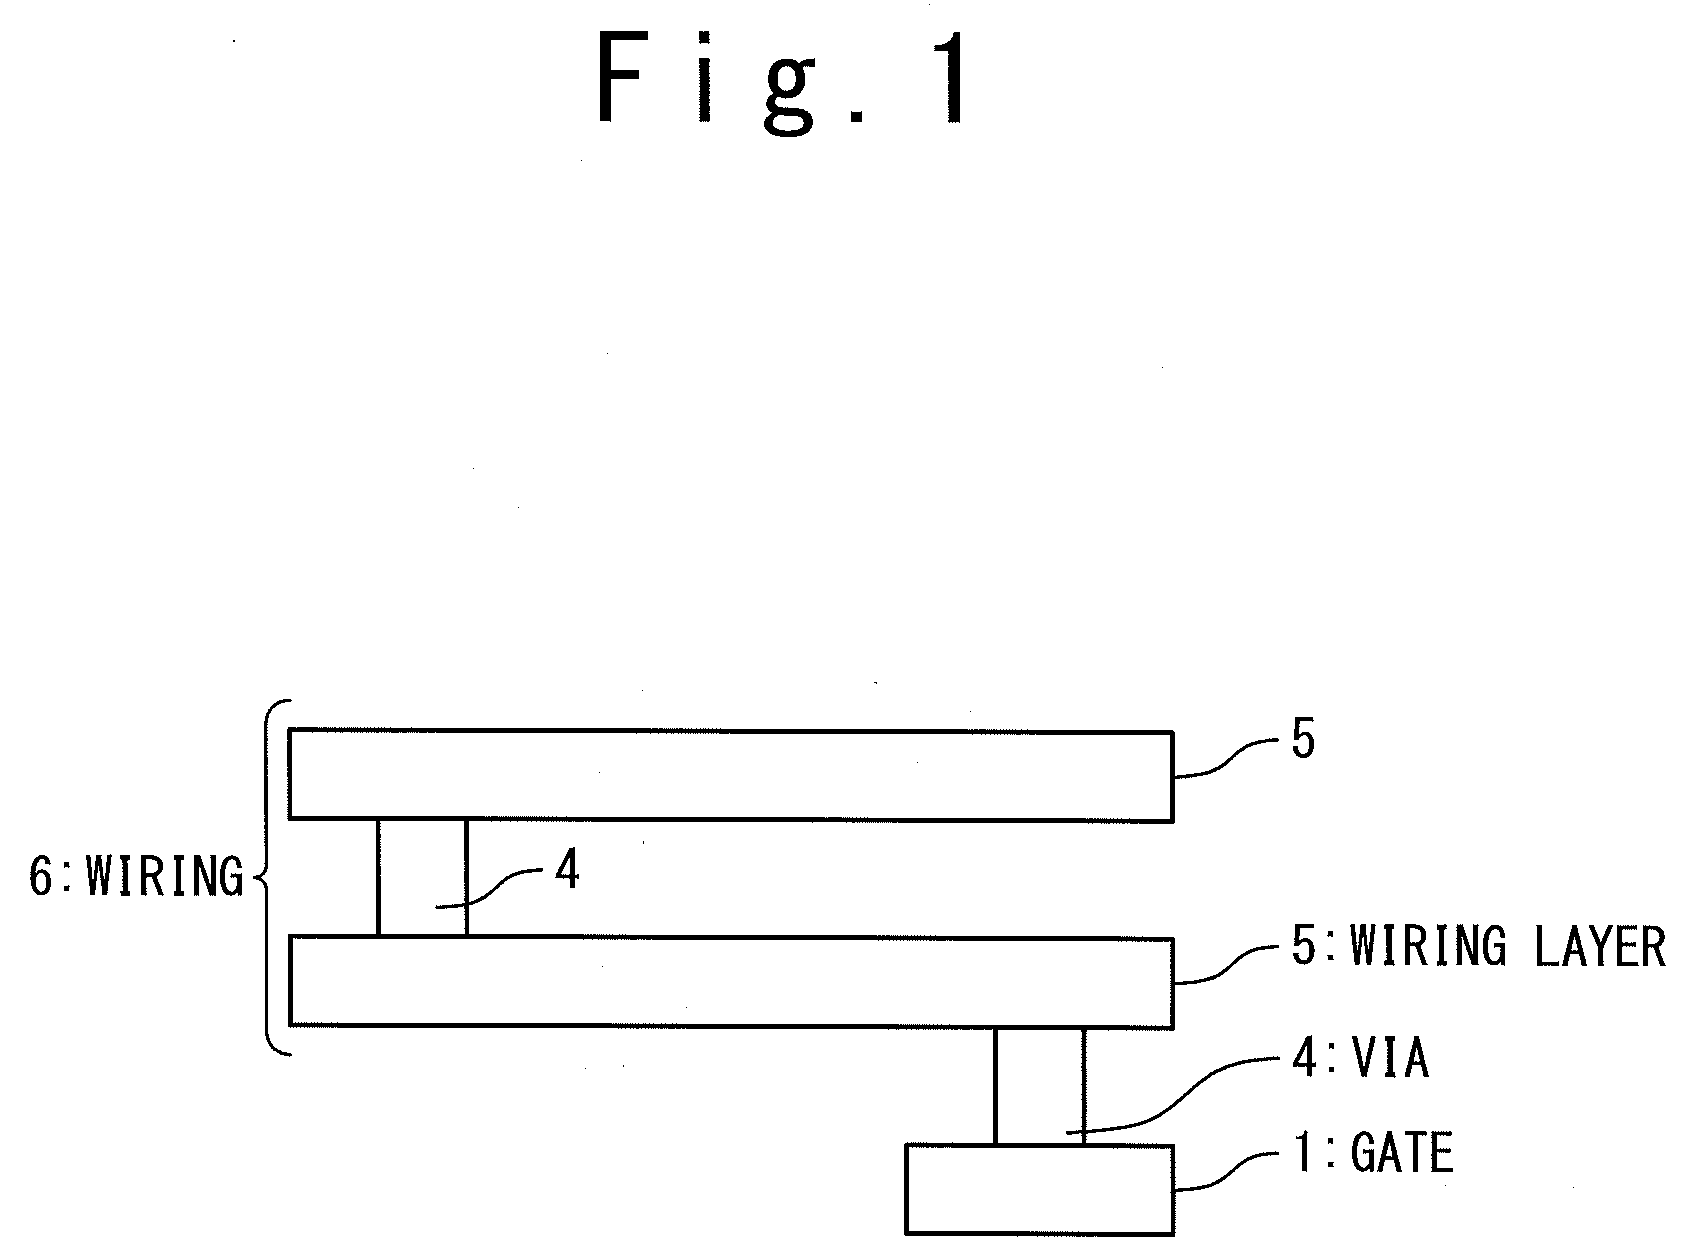 Method of designing semiconductor device